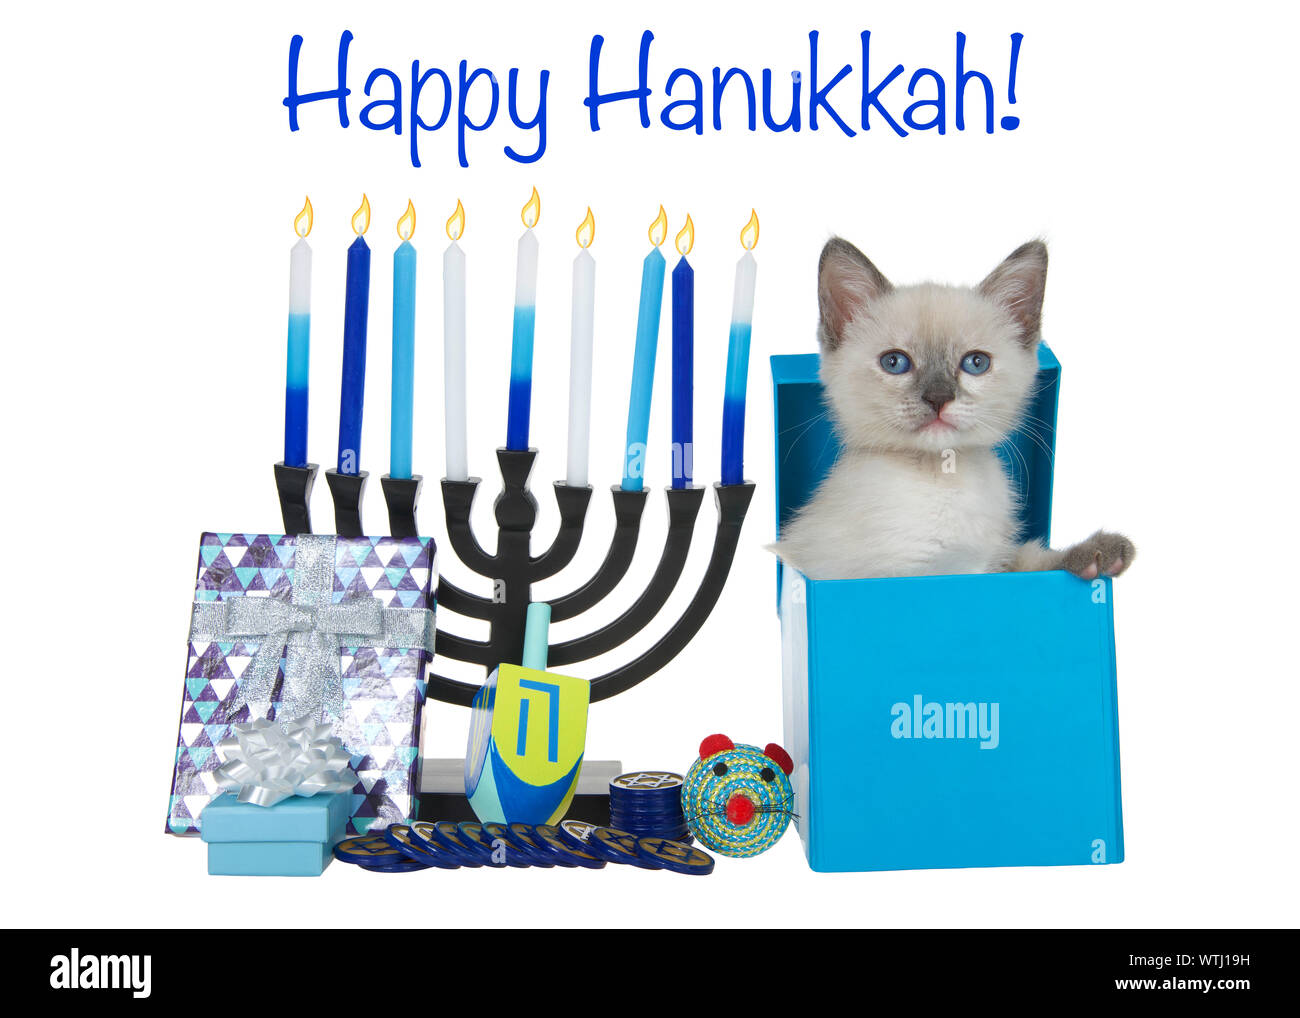 Adorable tiny siamese kitten peaking out of a blue present box next to menorah with dreidel, coins and presents plus toy mouse for Hanukkah. Animal an Stock Photo